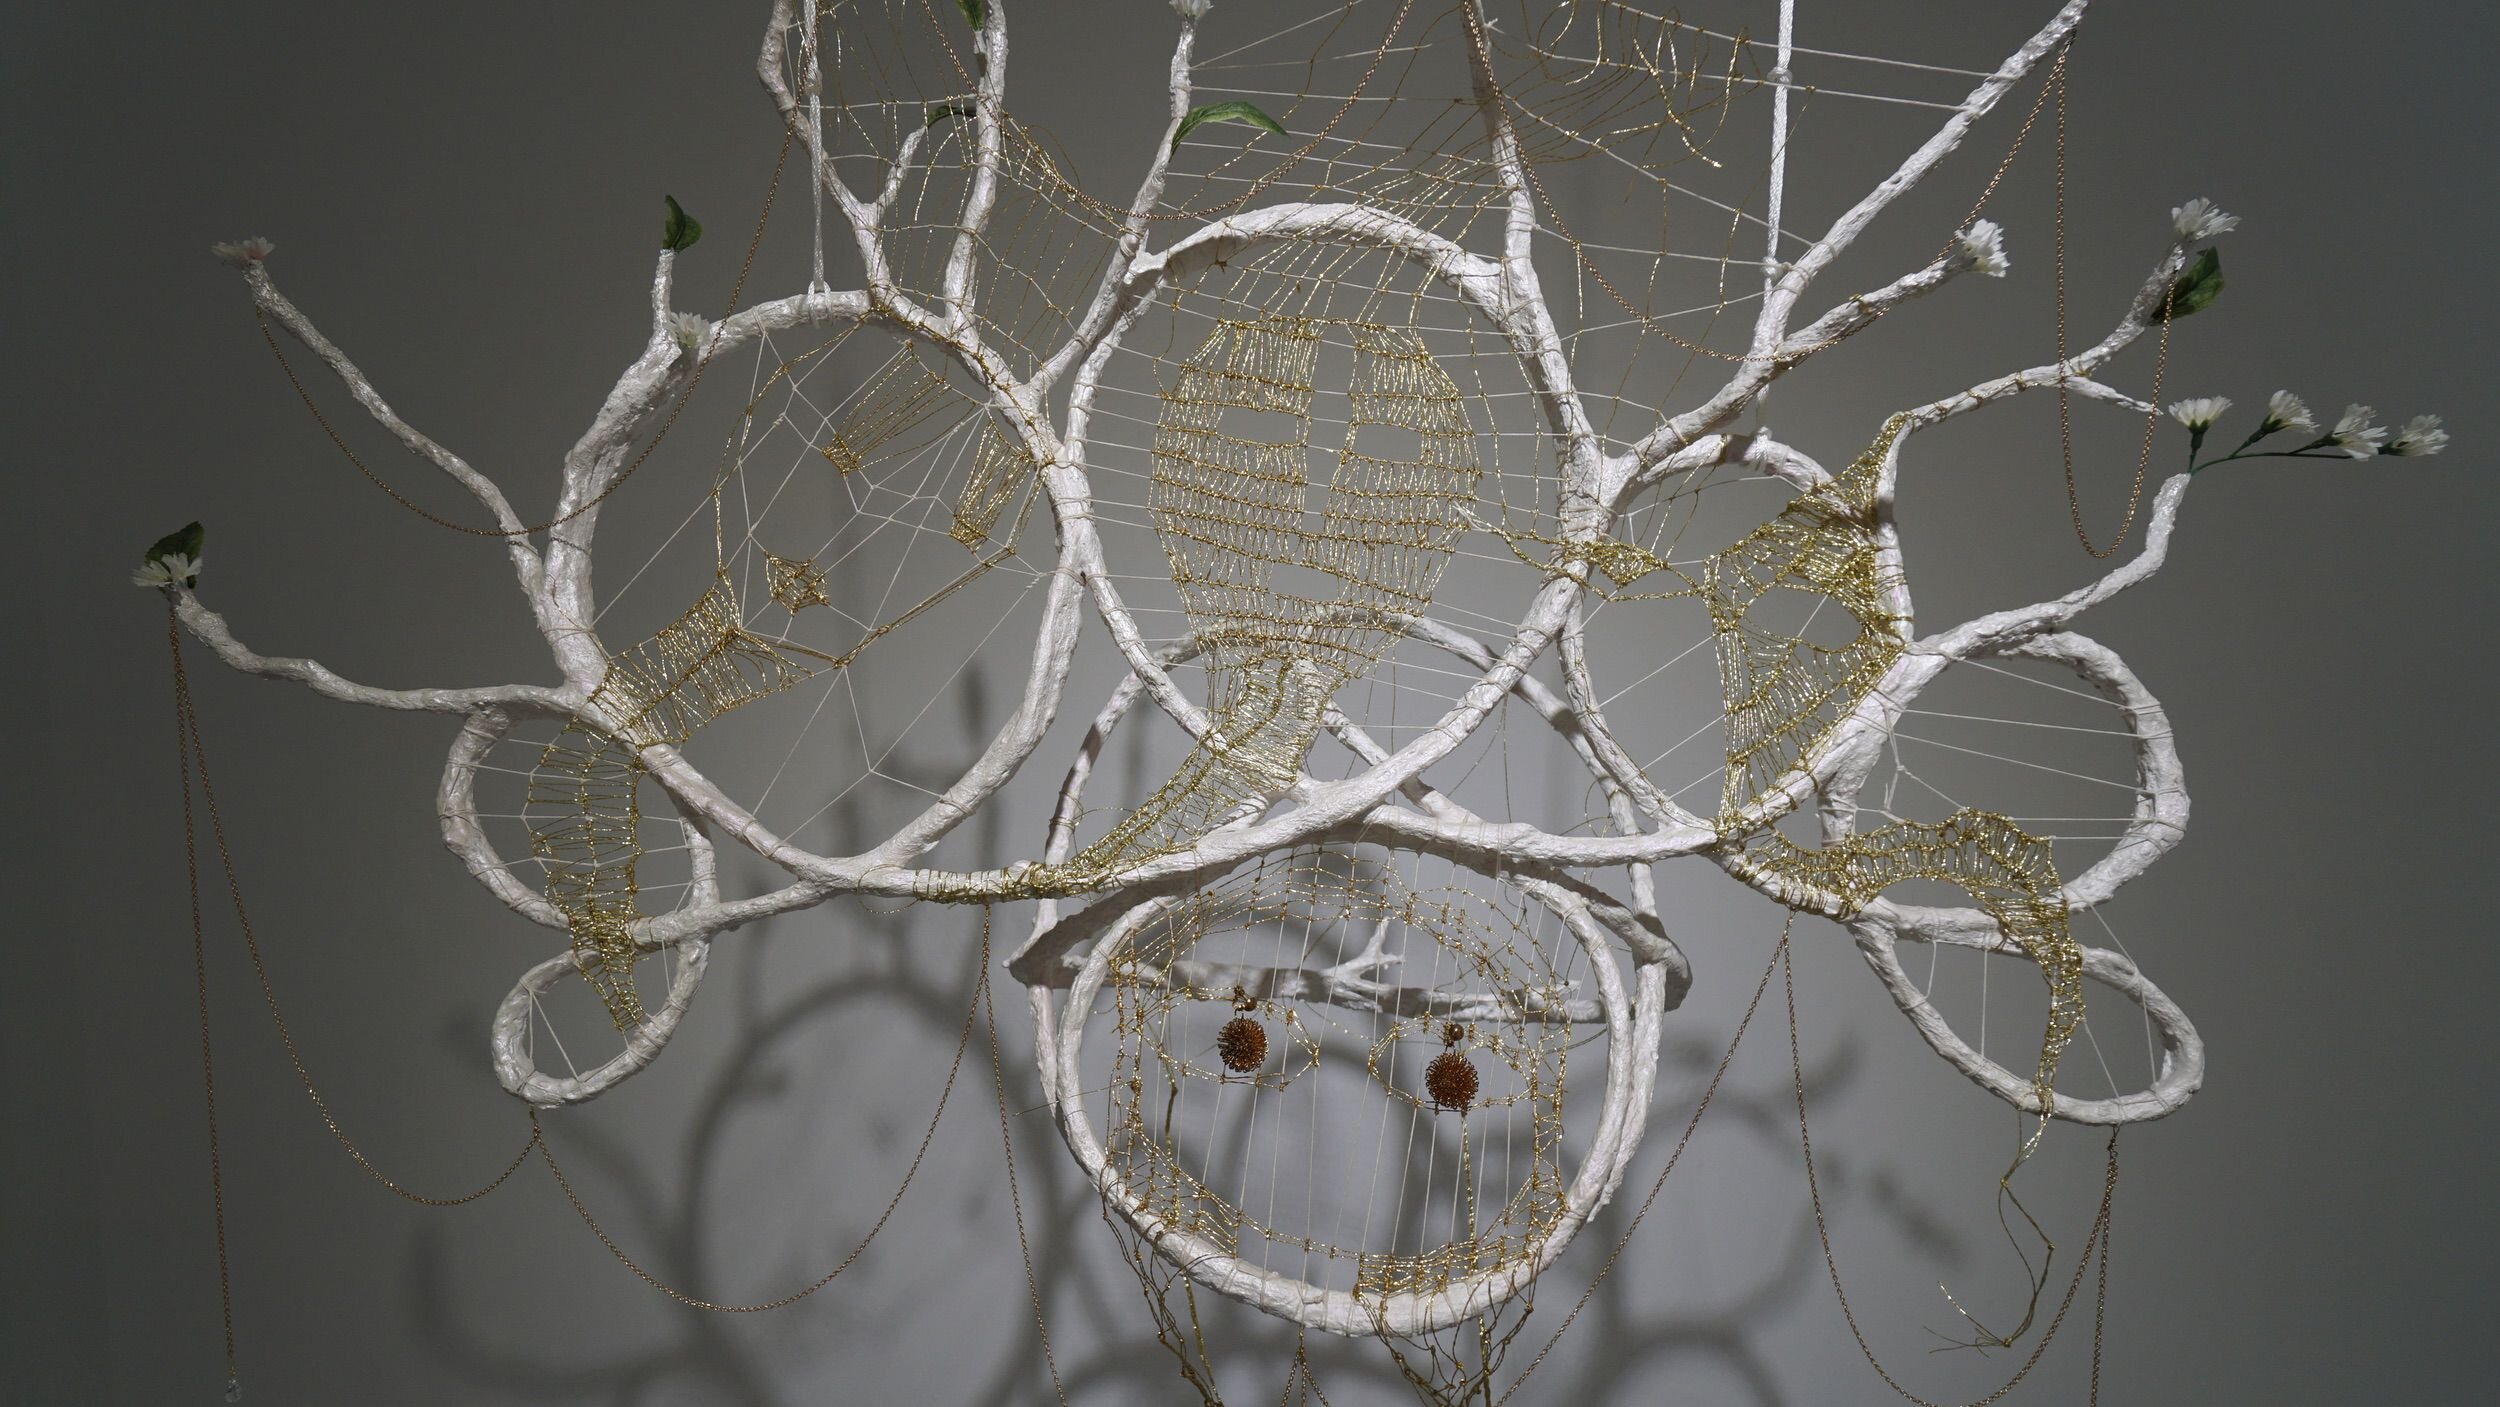  Mindy Rose Schwartz - Detail view  Gone , 2020 Sticks, reeds, resin, wire, earrrings, chain, crystals, fake flowers 43 x 41 x 13 in 109.2 x 104.1 x 33 cm 